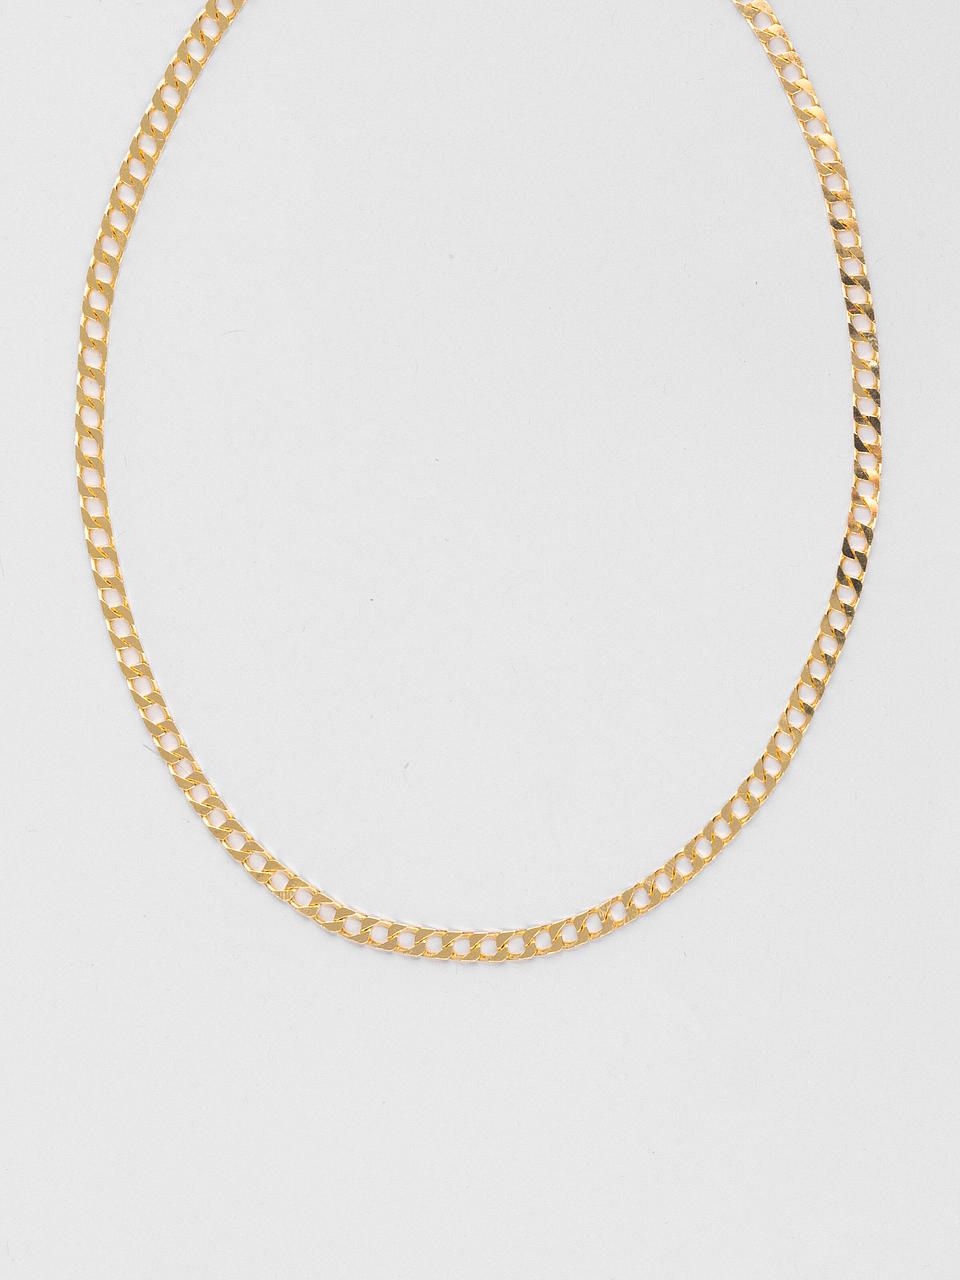 Square Curb Chain Necklace